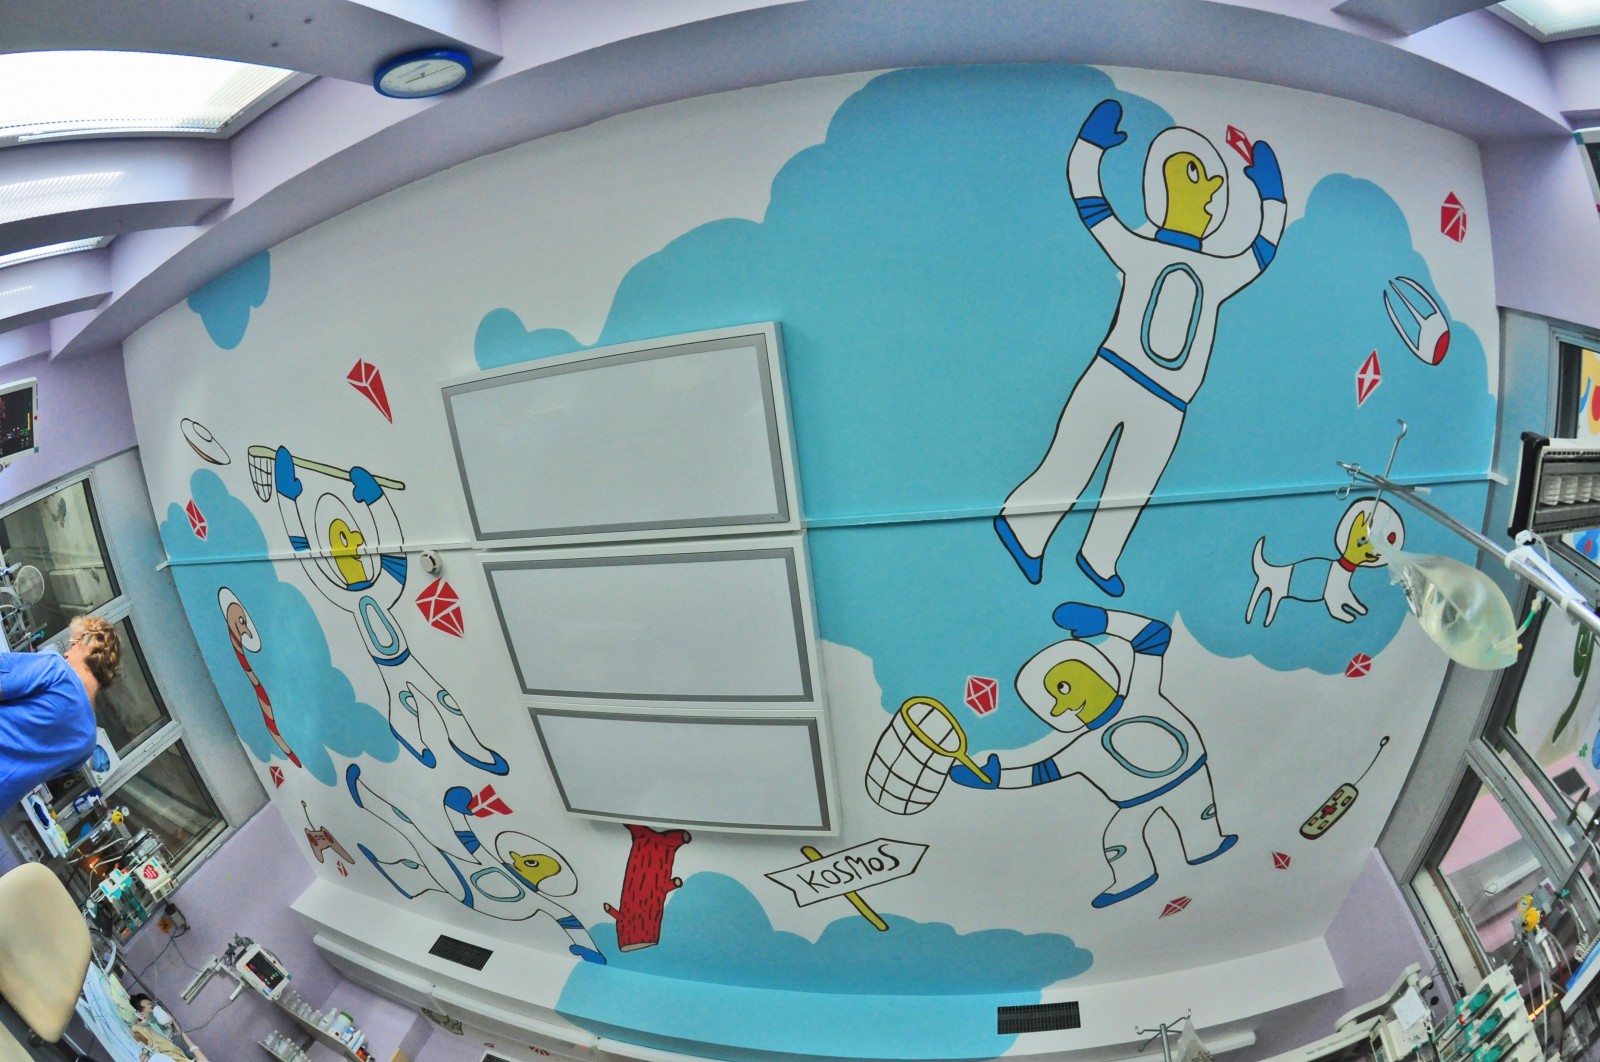 The Warsaw Children's Memorial Health Institute Intensive Care Department painting walls  | Ceiling Operation - The Children’s Memorial Health Institute | CSR | About us